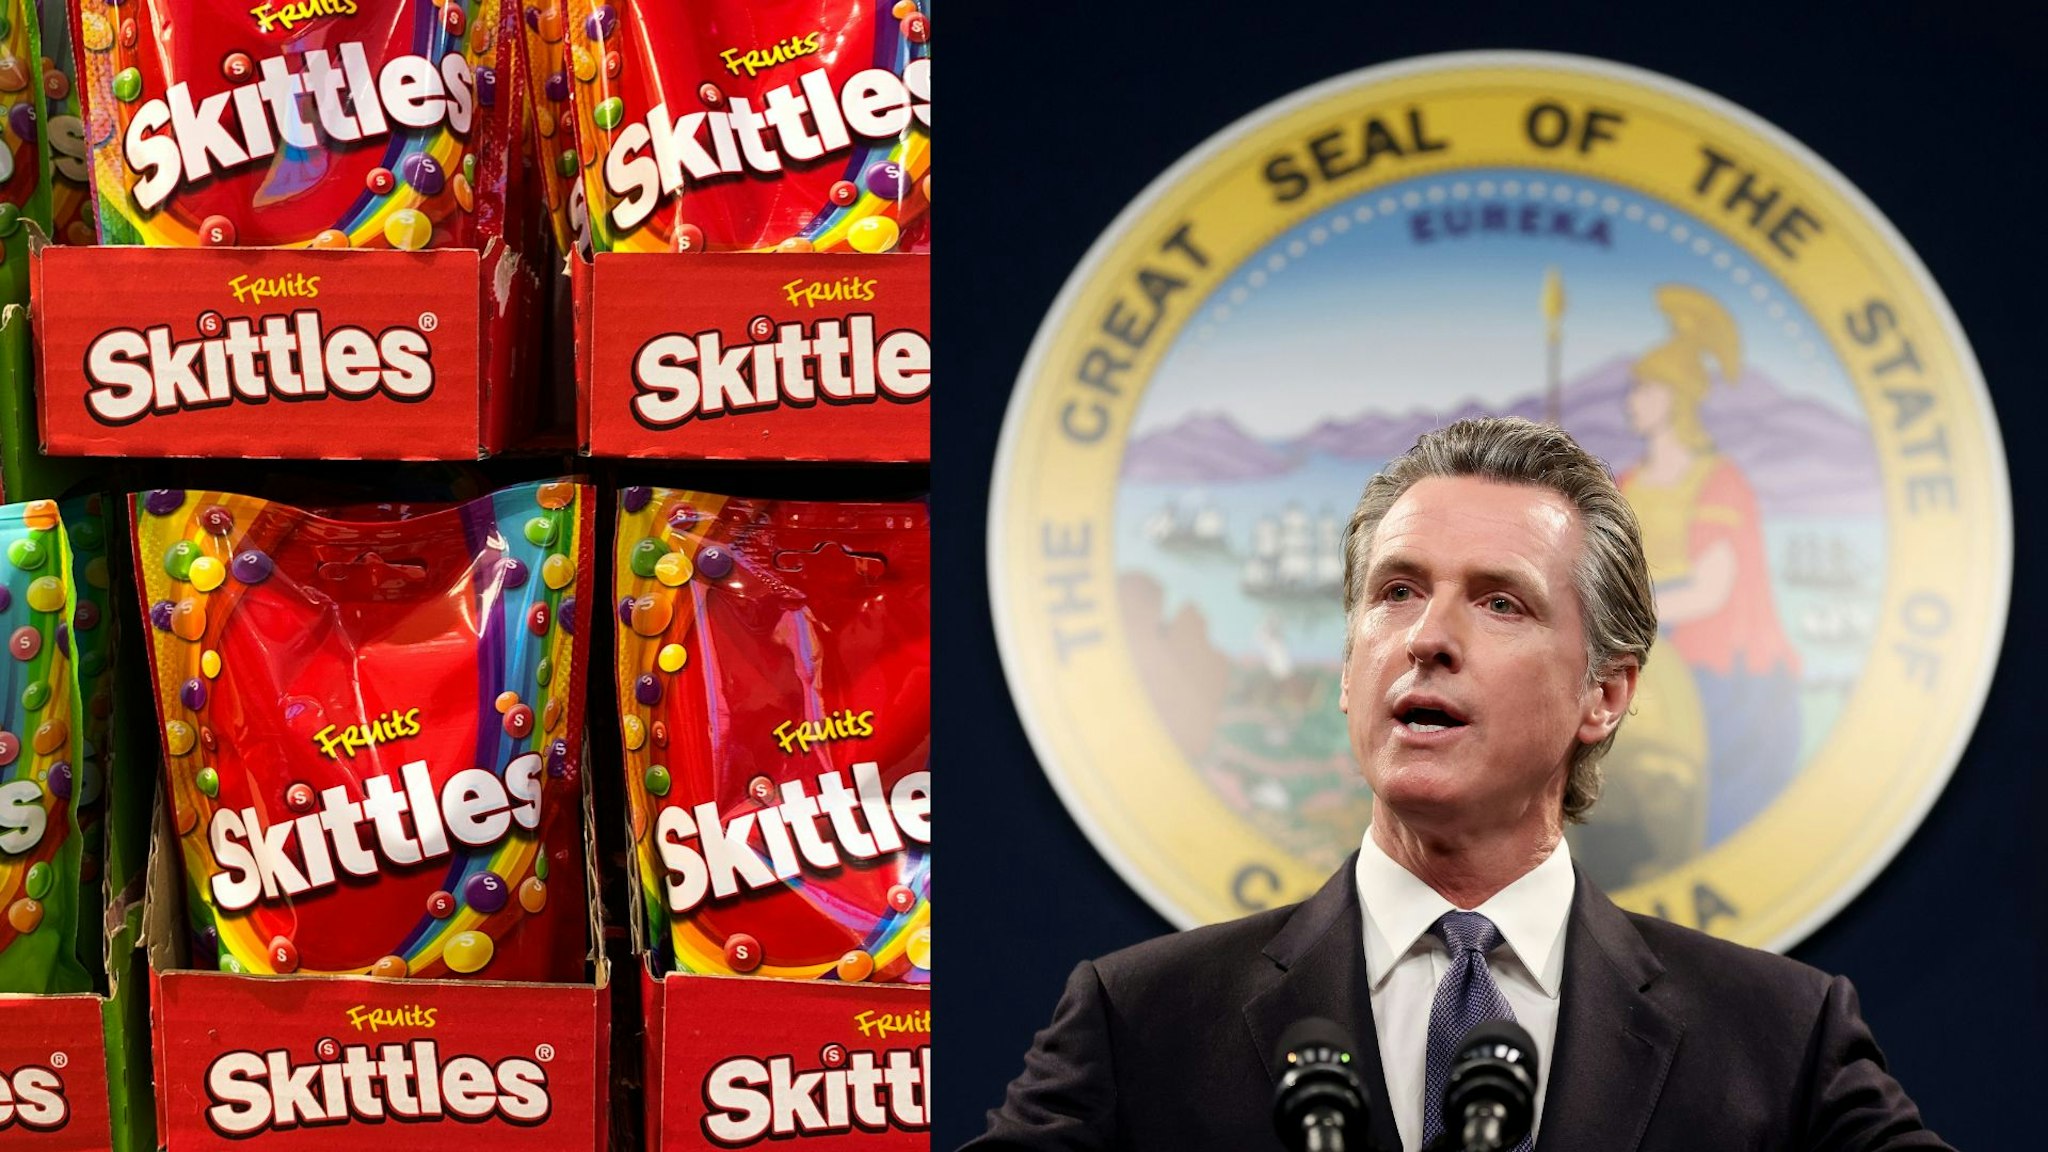 Skittles candies are seen in the shop in Milan, Italy on October 6, 2021. SACRAMENTO, CALIFORNIA - FEBRUARY 01: California Gov. Gavin Newsom speaks during a press conference on February 01, 2023 in Sacramento, California. California Gov. Gavin Newsom, state Attorney General Rob Bonta, state Senator Anthony Portantino (D-Burbank) and other state leaders announced SB2 - a new gun safety legislation that would establish stricter standards for Concealed Carry Weapon (CCW) permits to carry a firearm in public. The bill designates "sensitive areas," like bars, amusement parks and child daycare centers where guns would not be allowed.